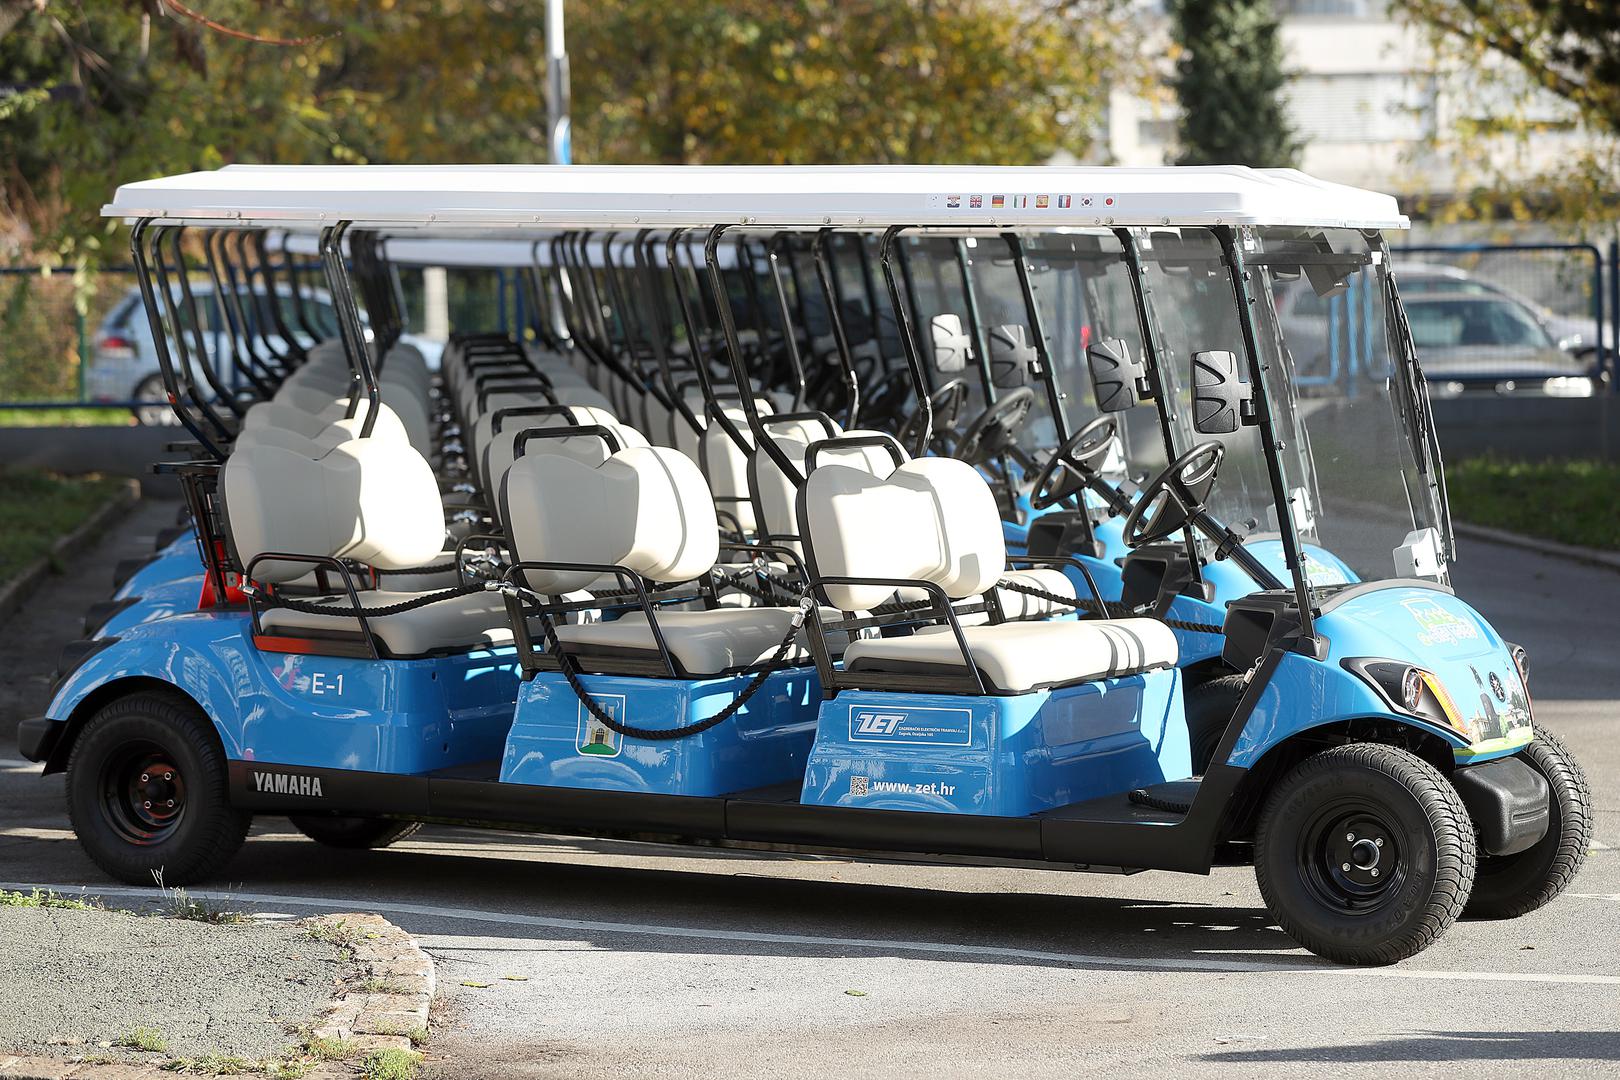 Zagreb's 'Fulir' electric vehicles offer free rides downtown